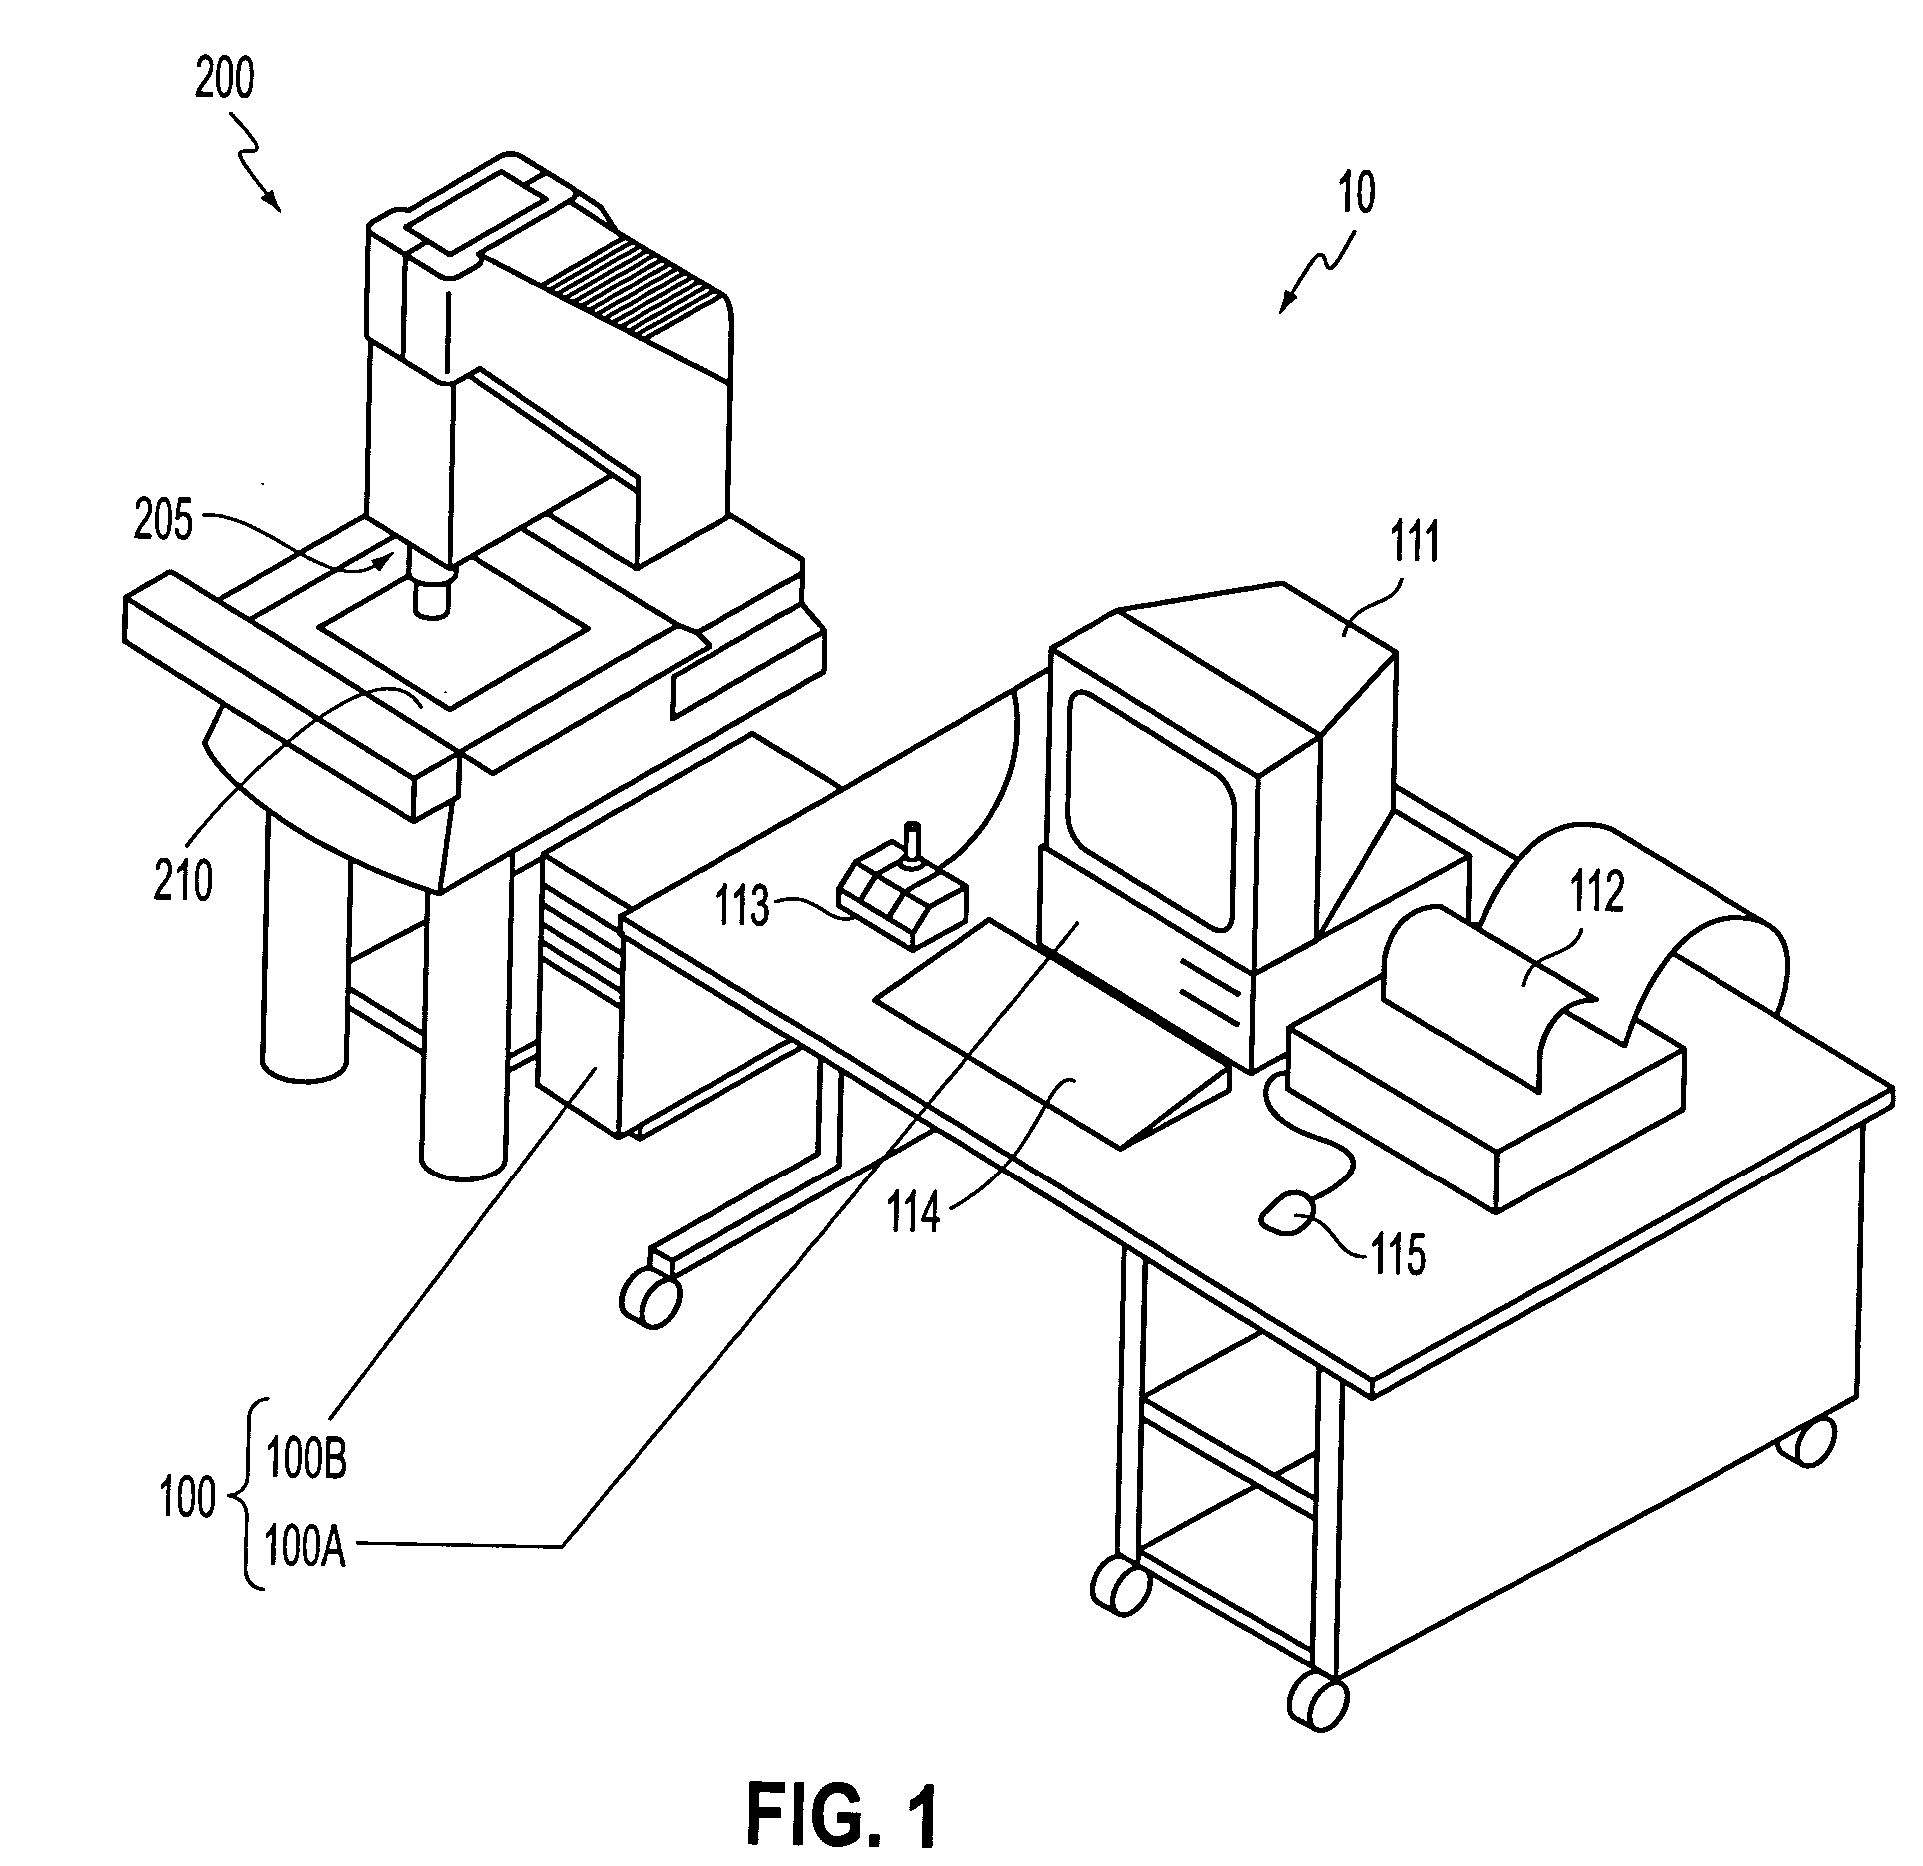 Methods and apparatus for inspection of lines embedded in highly textured material